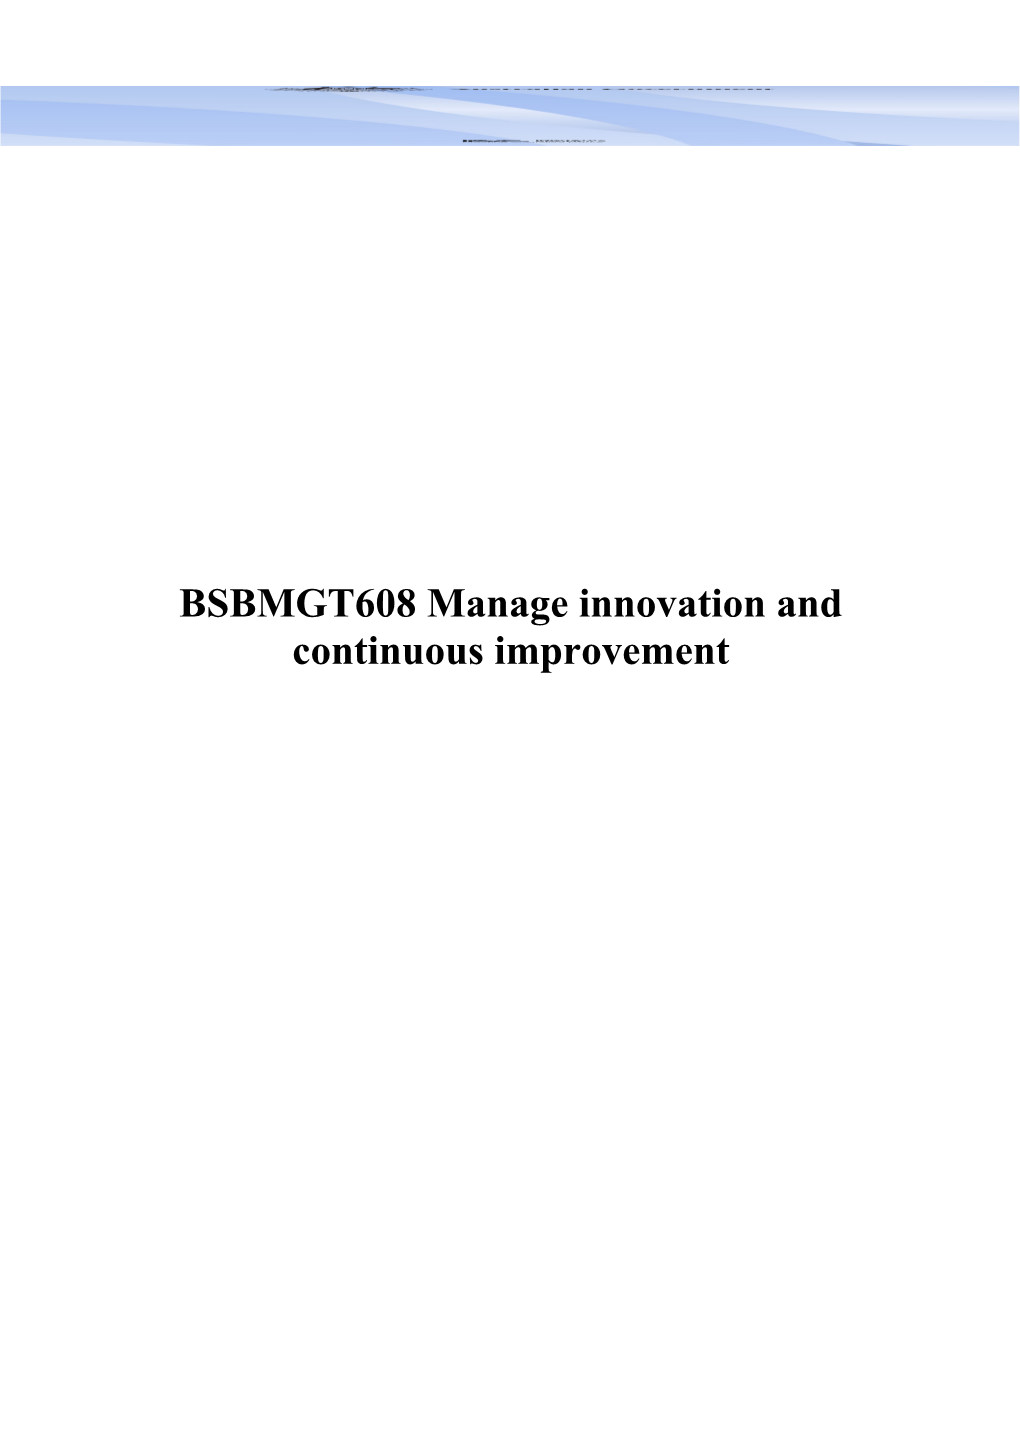 BSBMGT608 Manage Innovation and Continuous Improvement